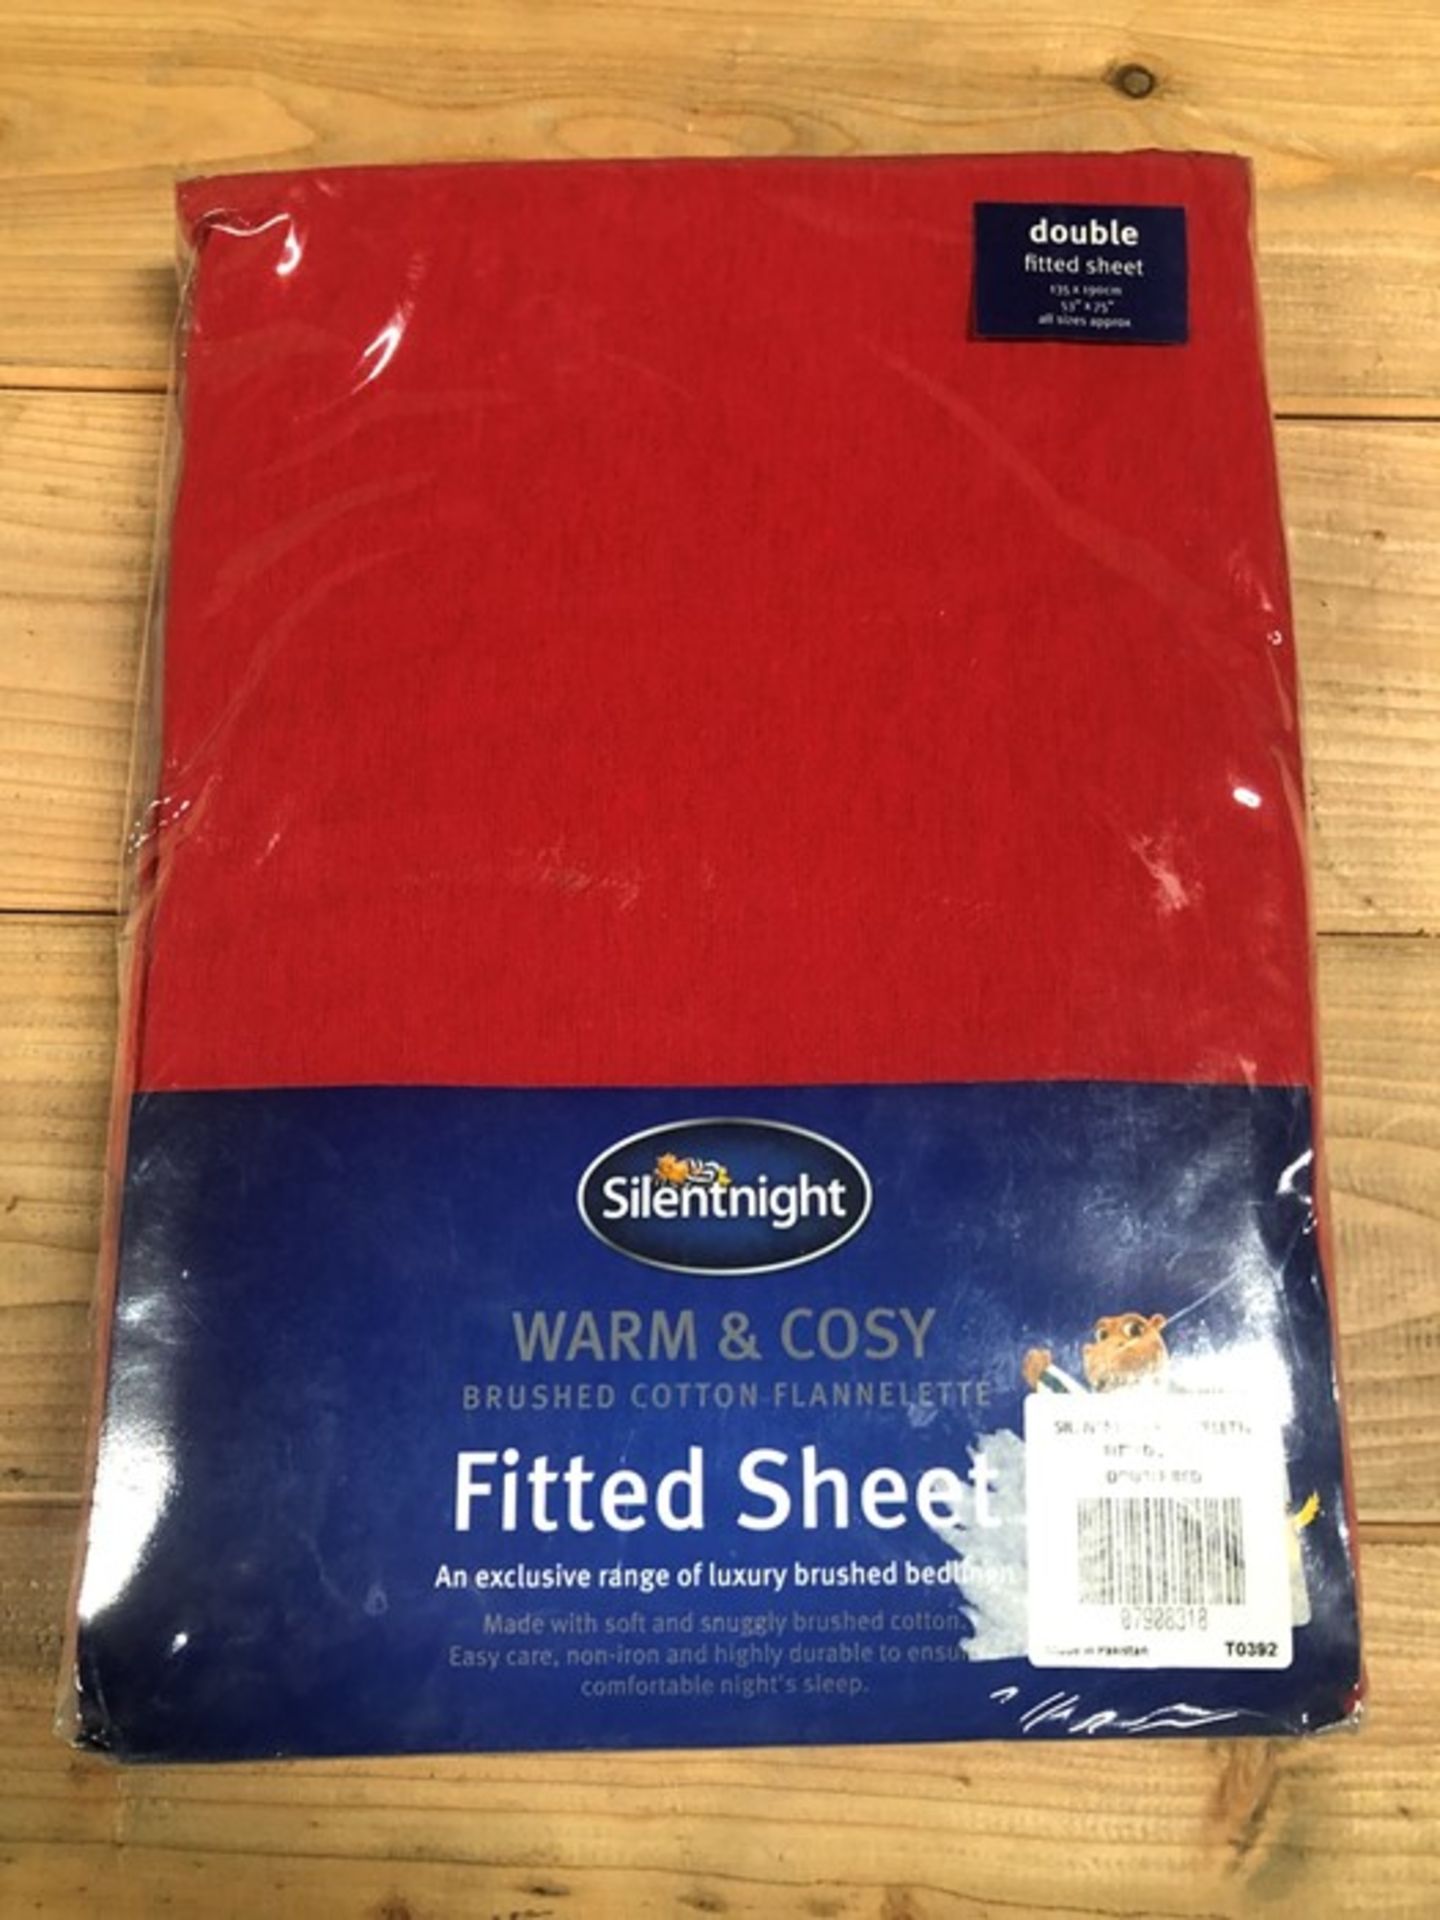 1 SILENT NIGHT WARM AND COSY DOUBLE FITTED SHEET IN RED (PUBLIC VIEWING AVAILABLE)